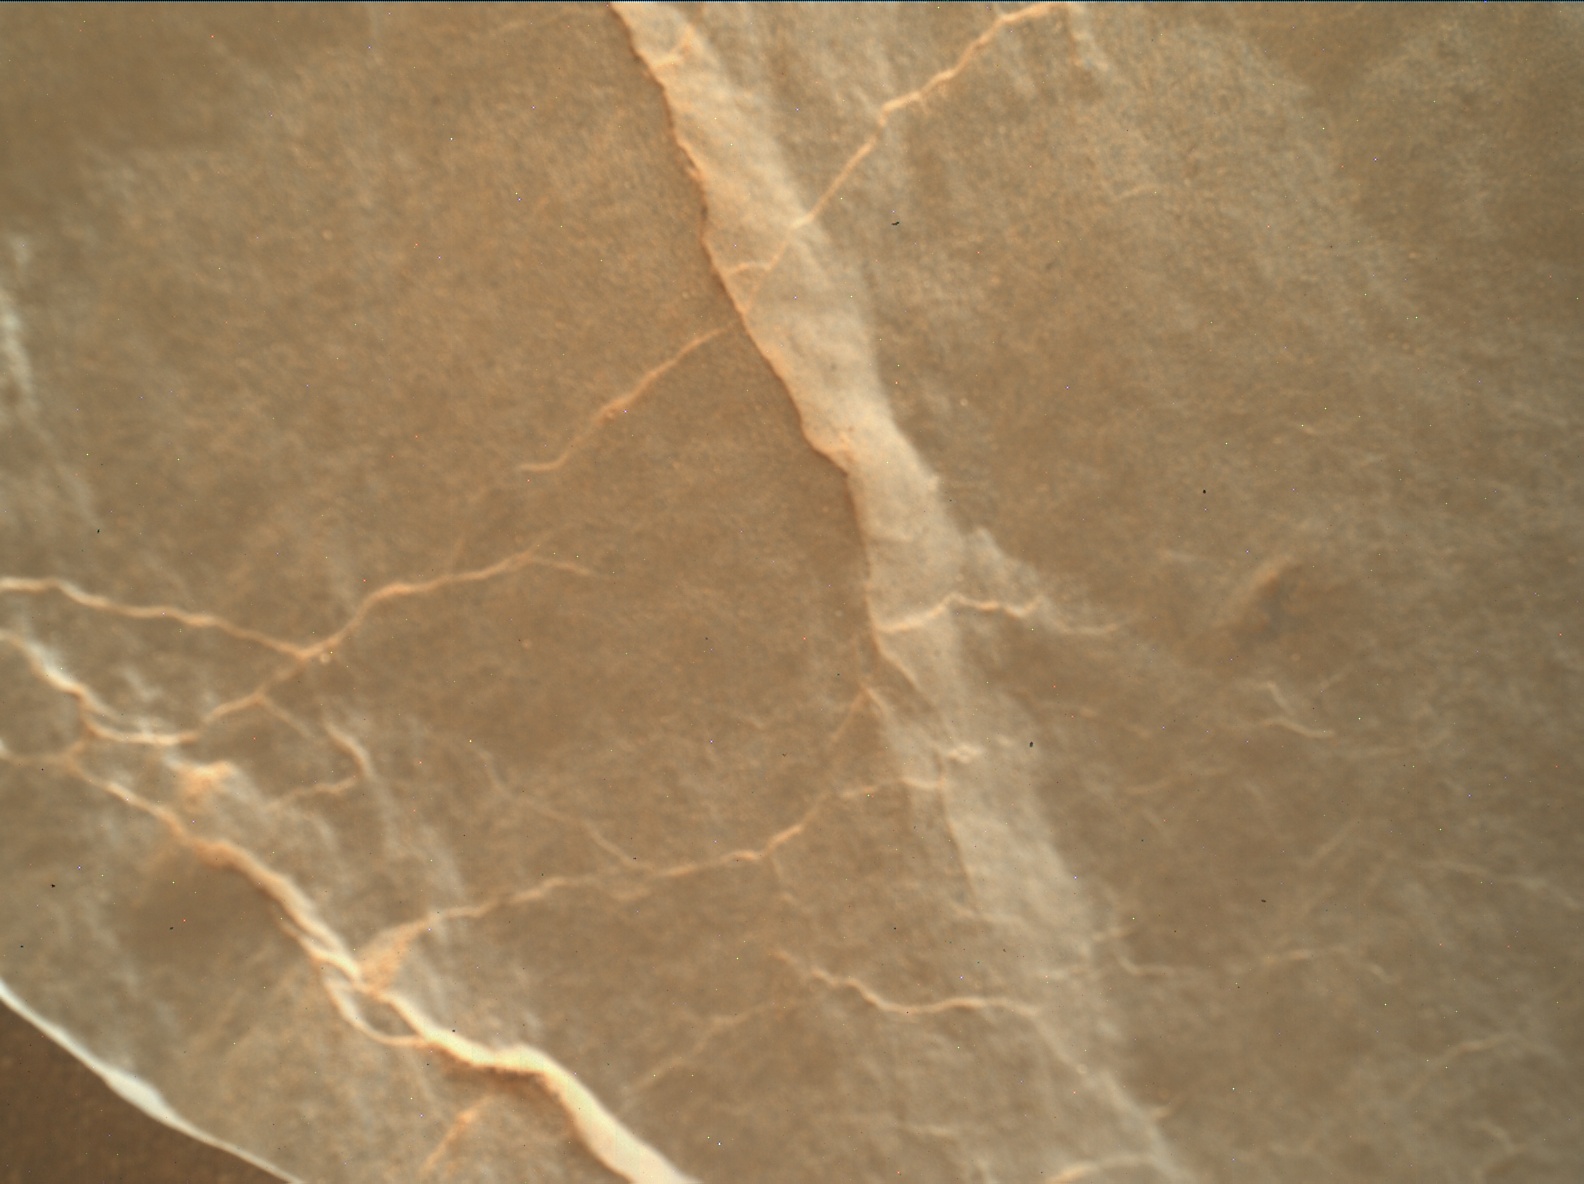 Nasa's Mars rover Curiosity acquired this image using its Mars Hand Lens Imager (MAHLI) on Sol 3422